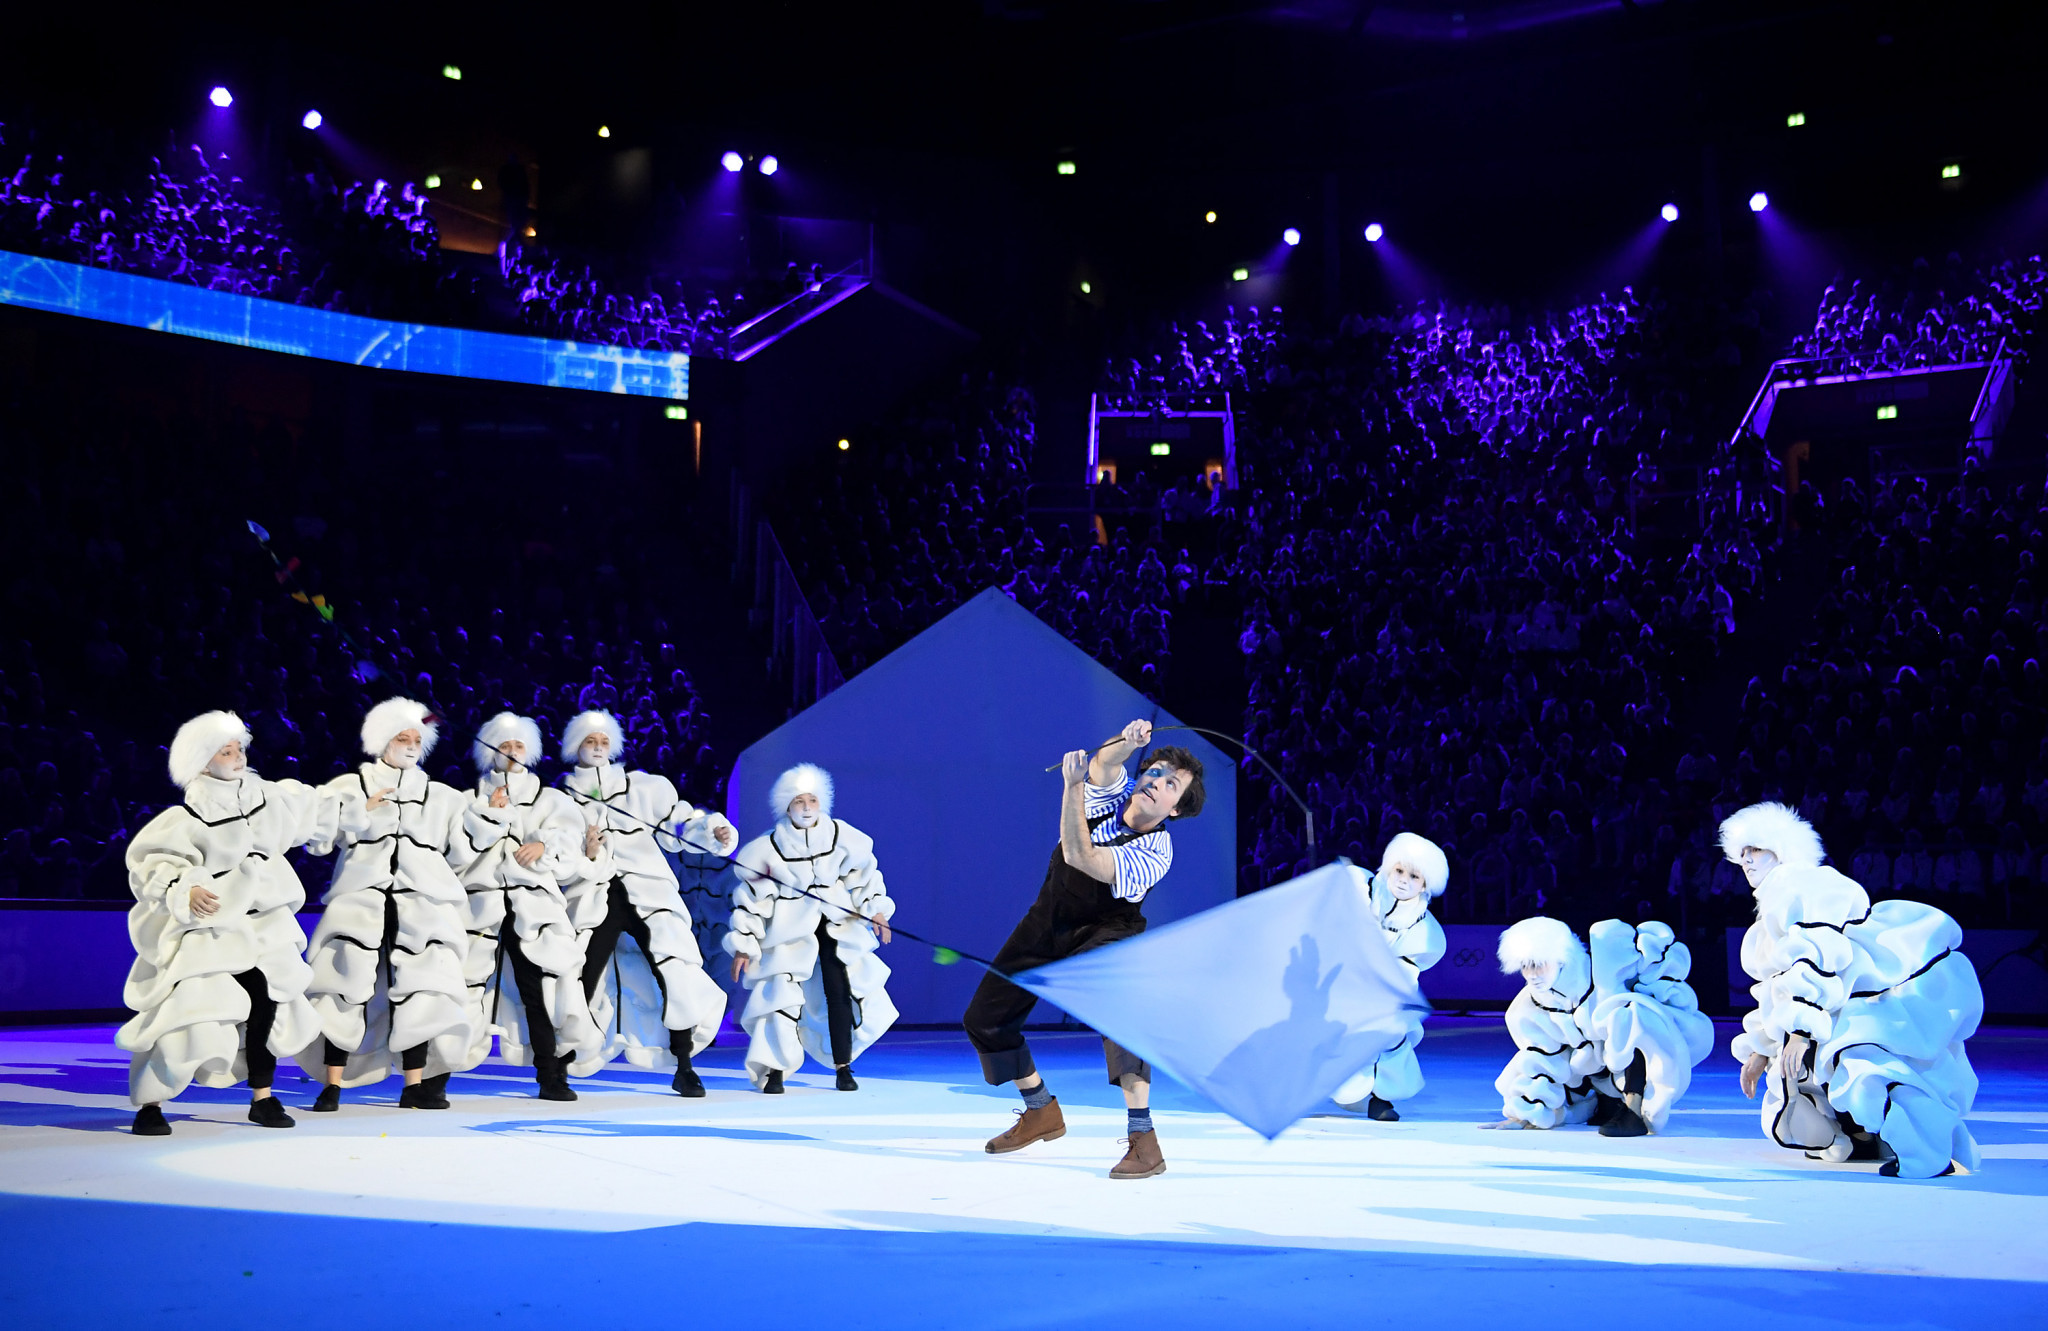 The Ceremony included a performance from Swiss figure skater Stephane Lambiel, Olympic silver medallist at Turin 2006 ©Getty Images